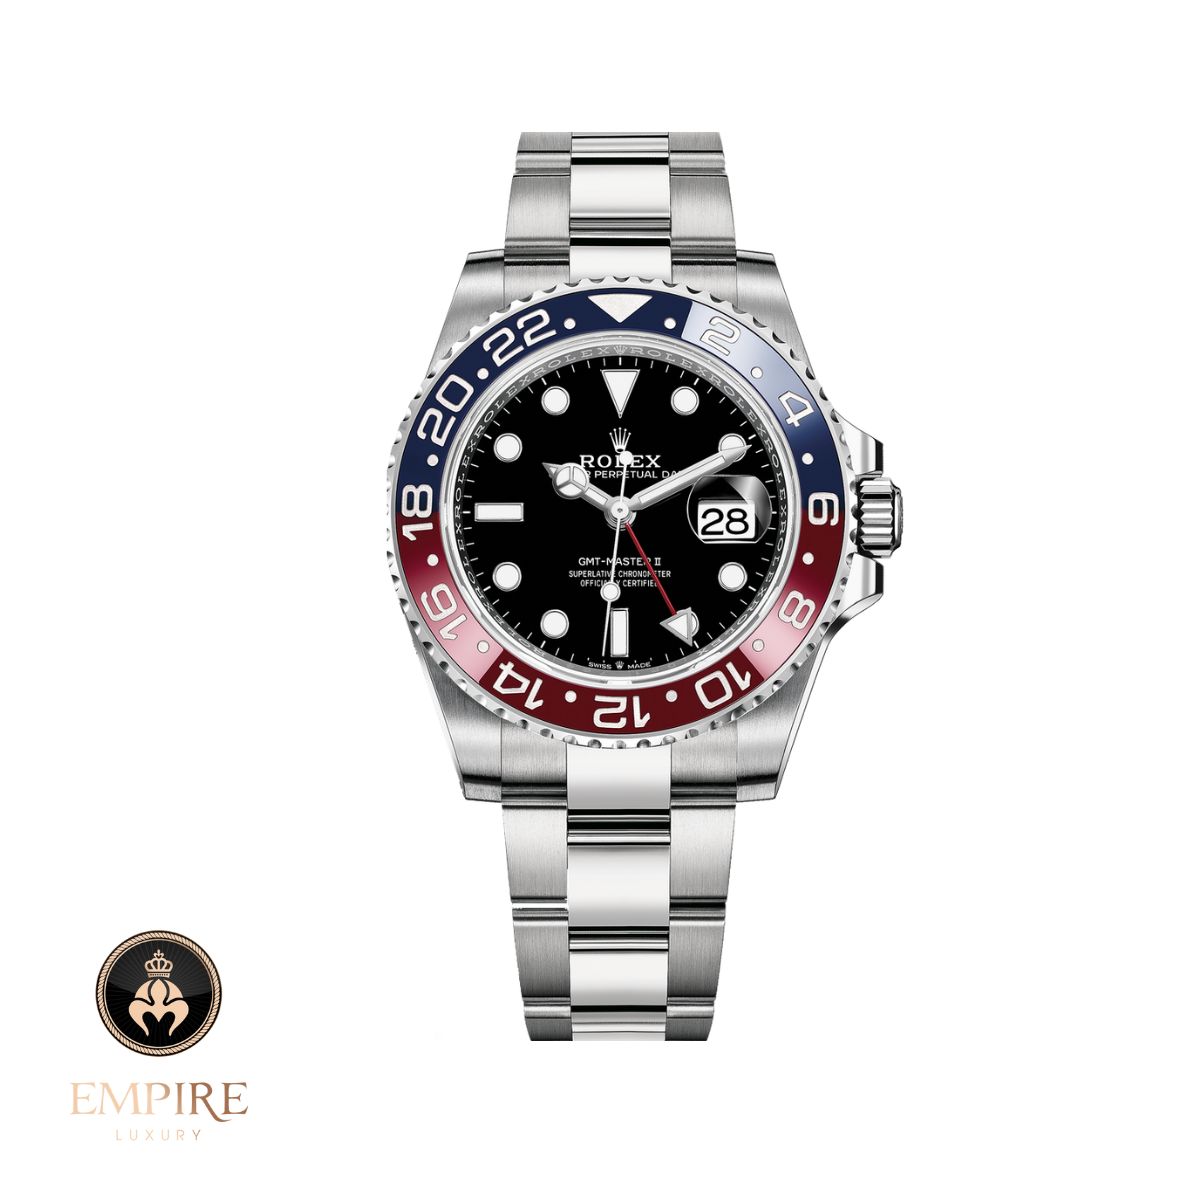 Đồng Hồ Rolex GMT Master II 40 126710BLRO-0002 Pepsi Oystersteel Dây Đeo Oyster